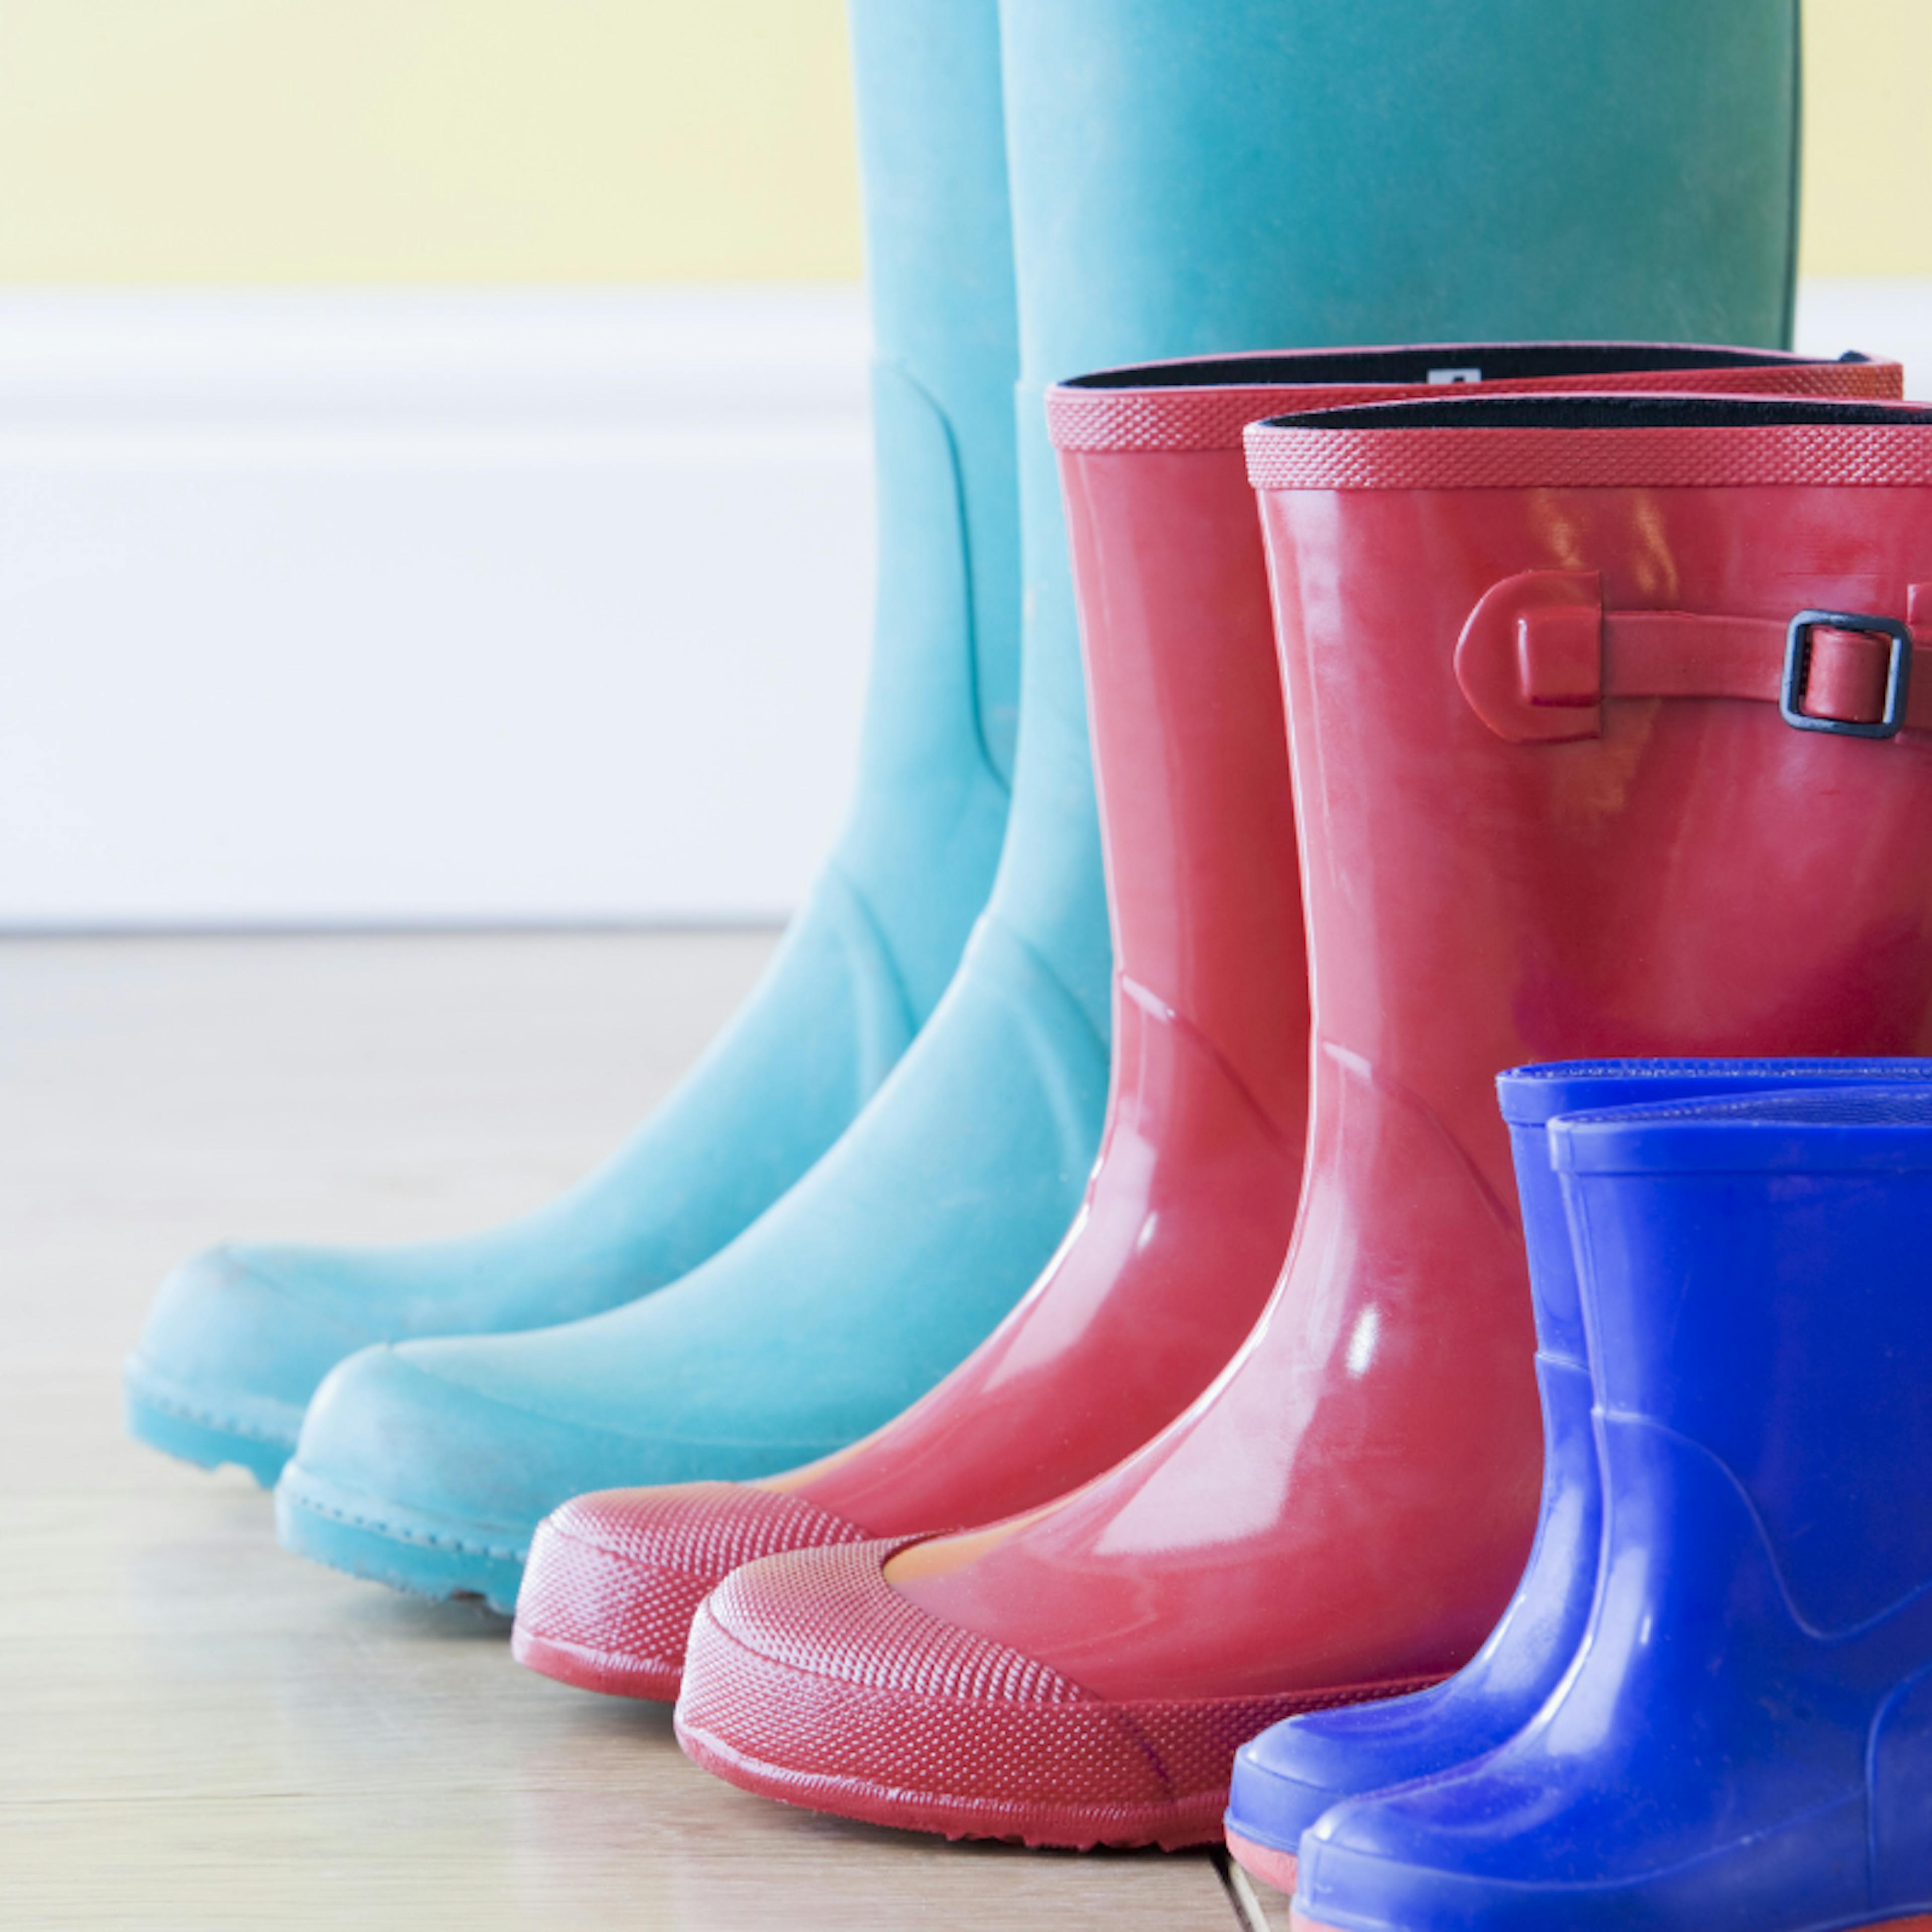 Colourful family wellies